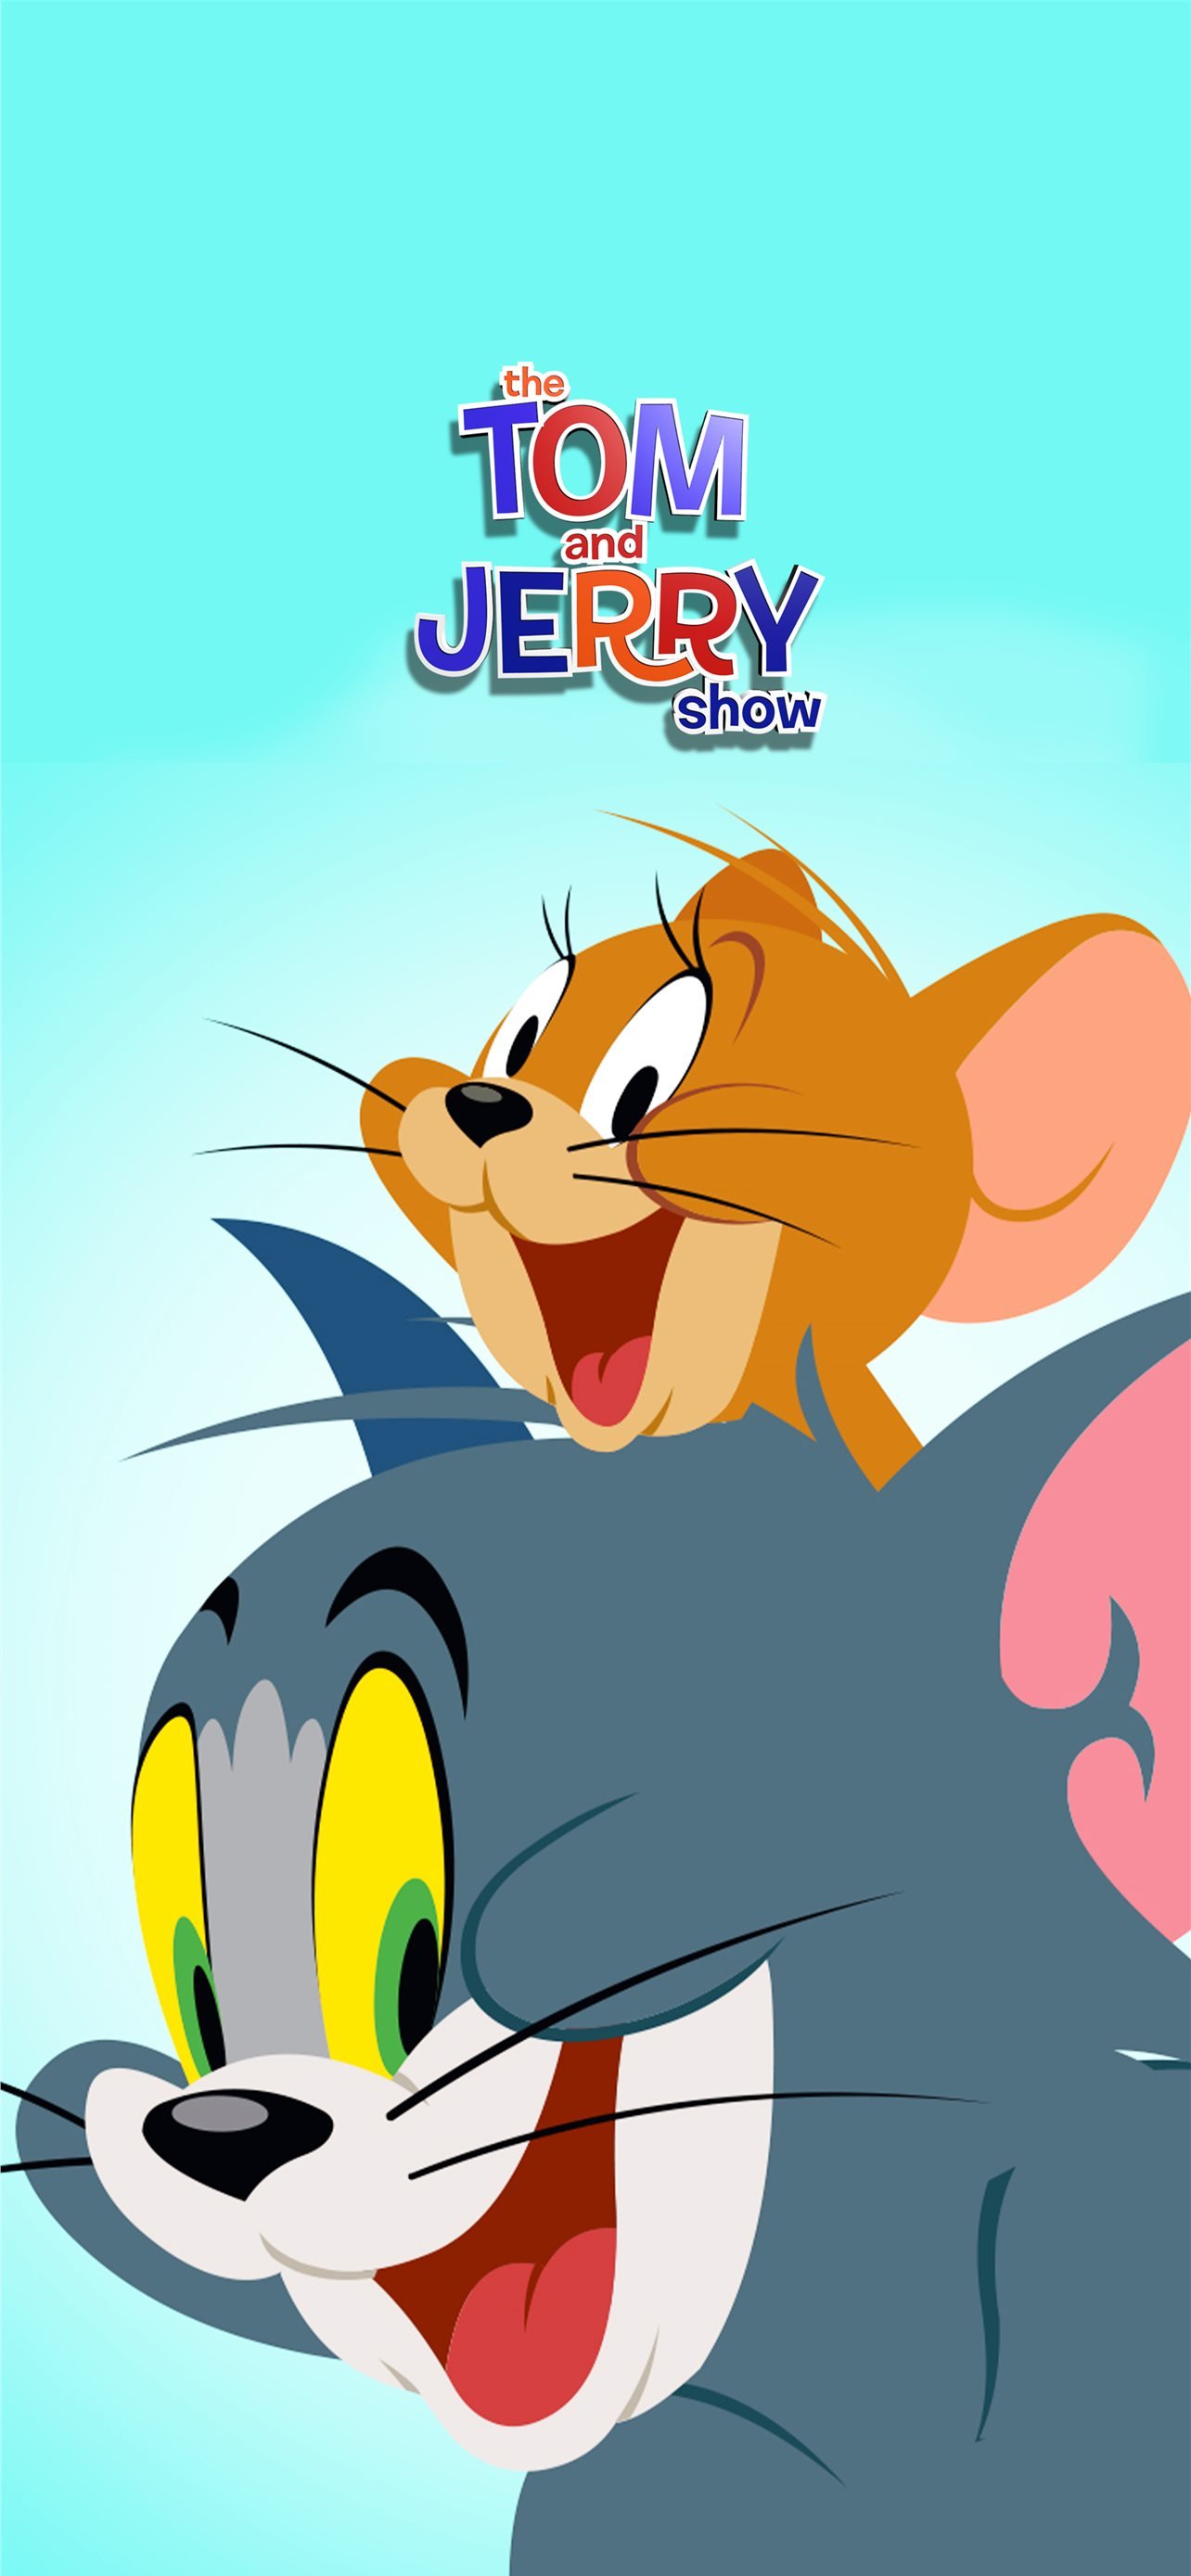 The tom and jerry show - poster